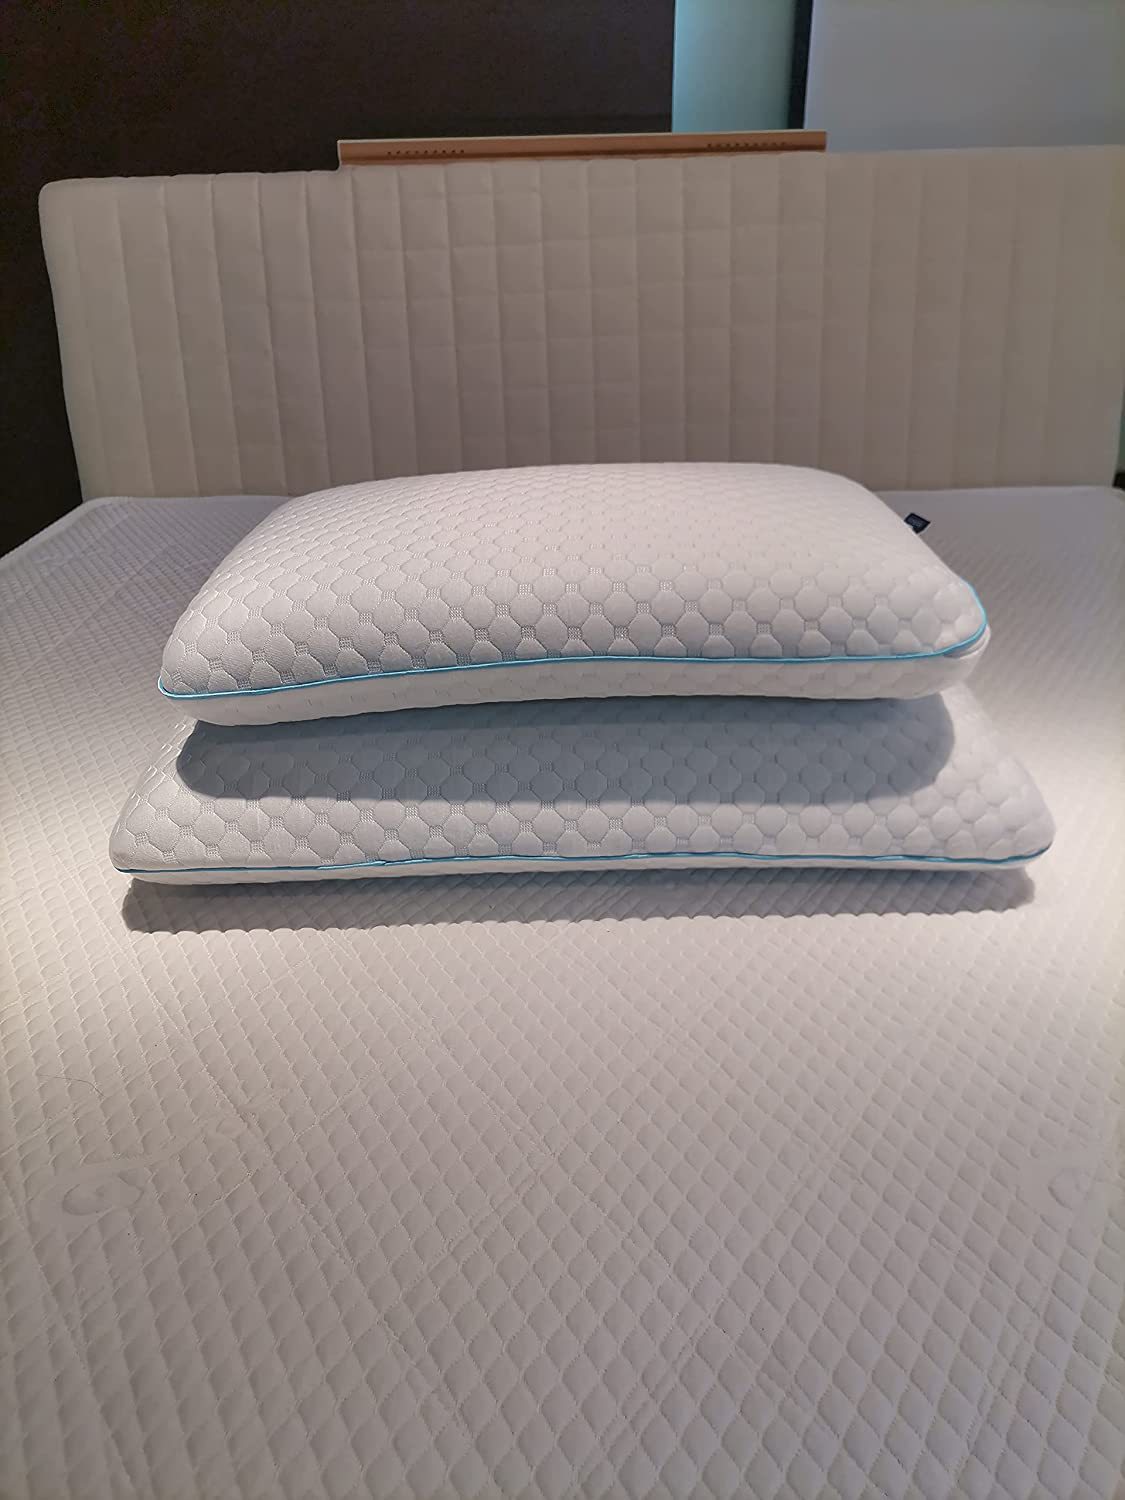 bedreamy Memory Foam Pillow with Bamboo Cover, Soothing and Cooling Mattress Topper Ventilated Design Soft Flocking Pillow (Queen)